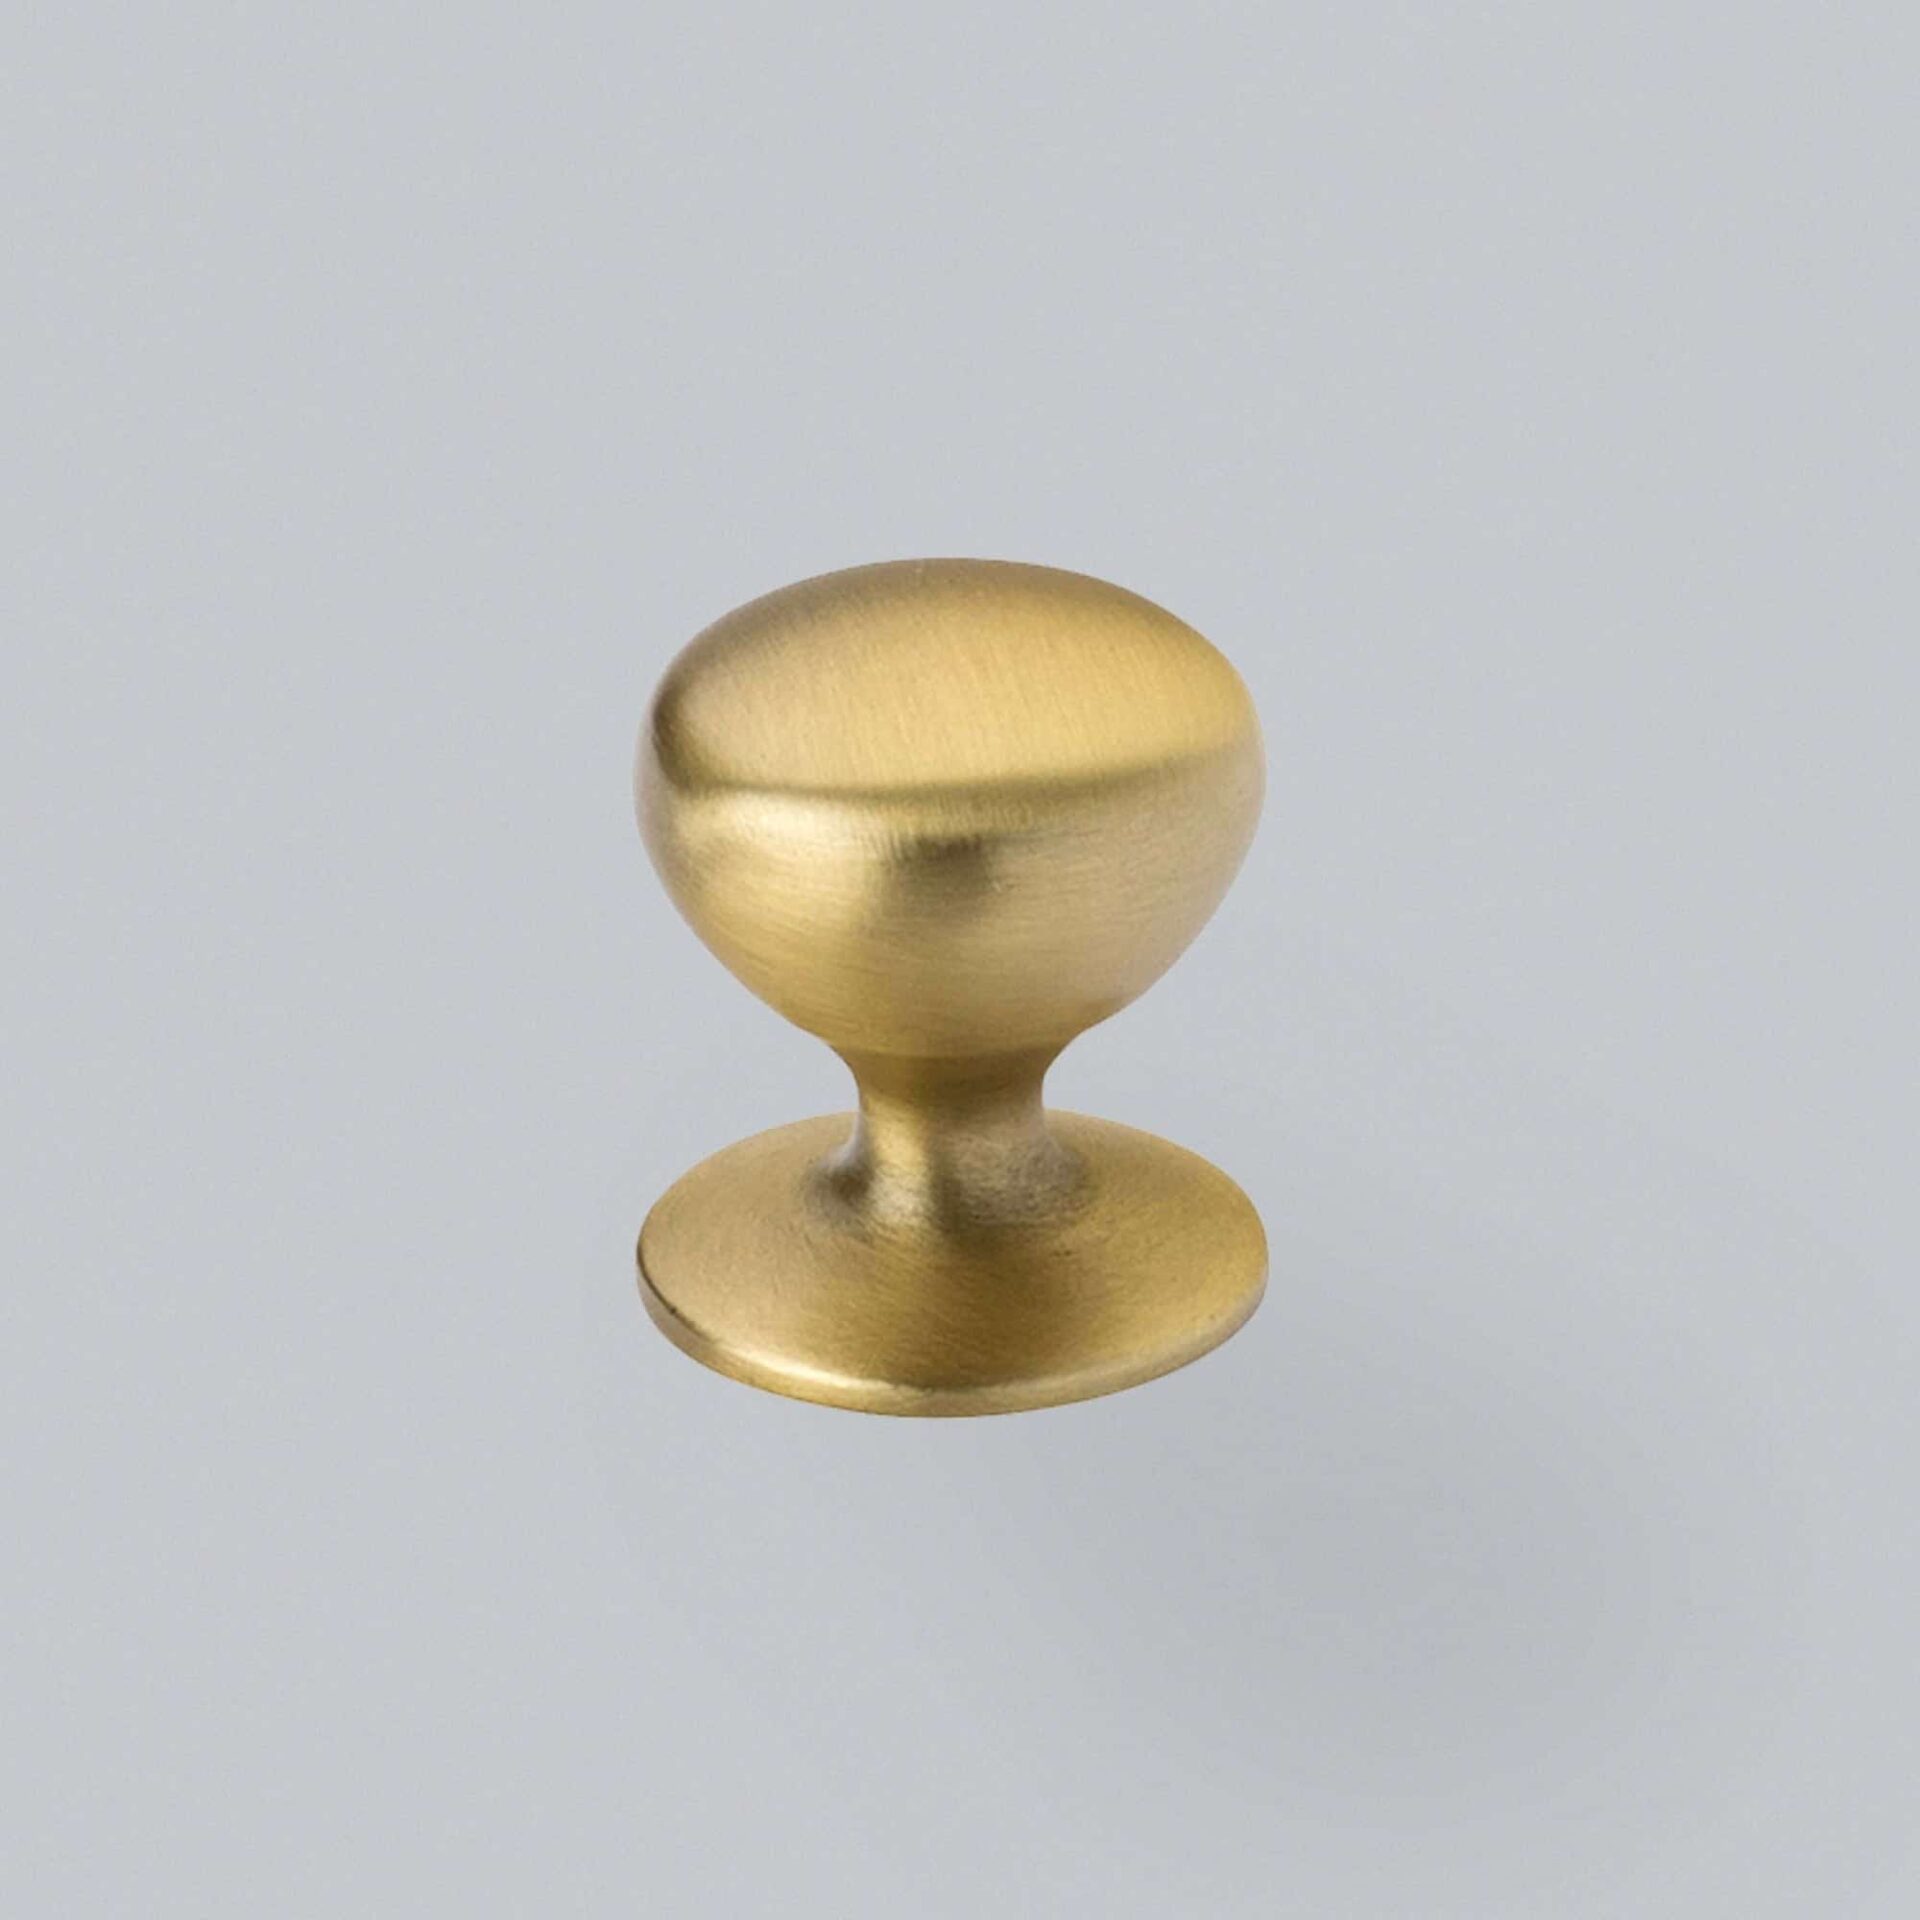 Get a Classy Upgrade with Brushed Brass Hampton Cup Handle